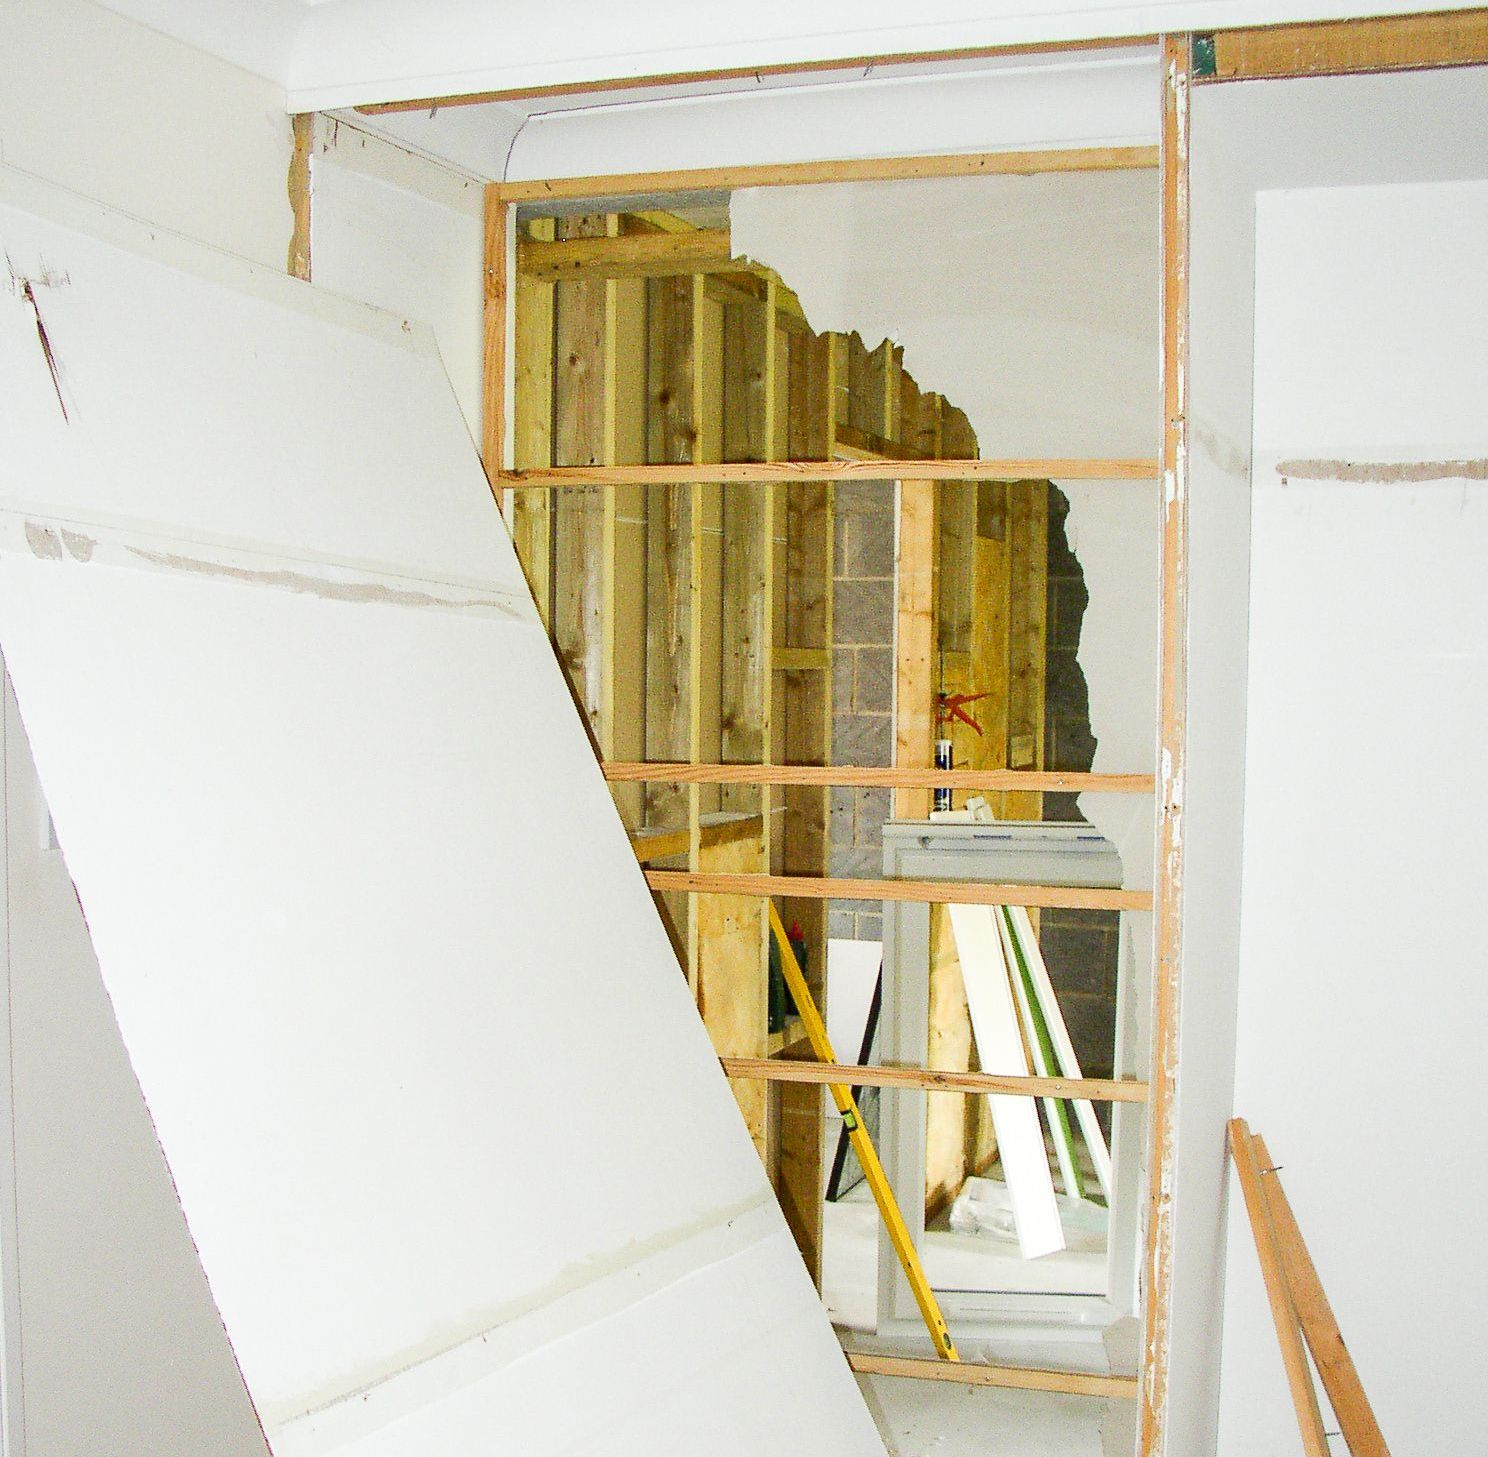 Removing walls to improve home layouts